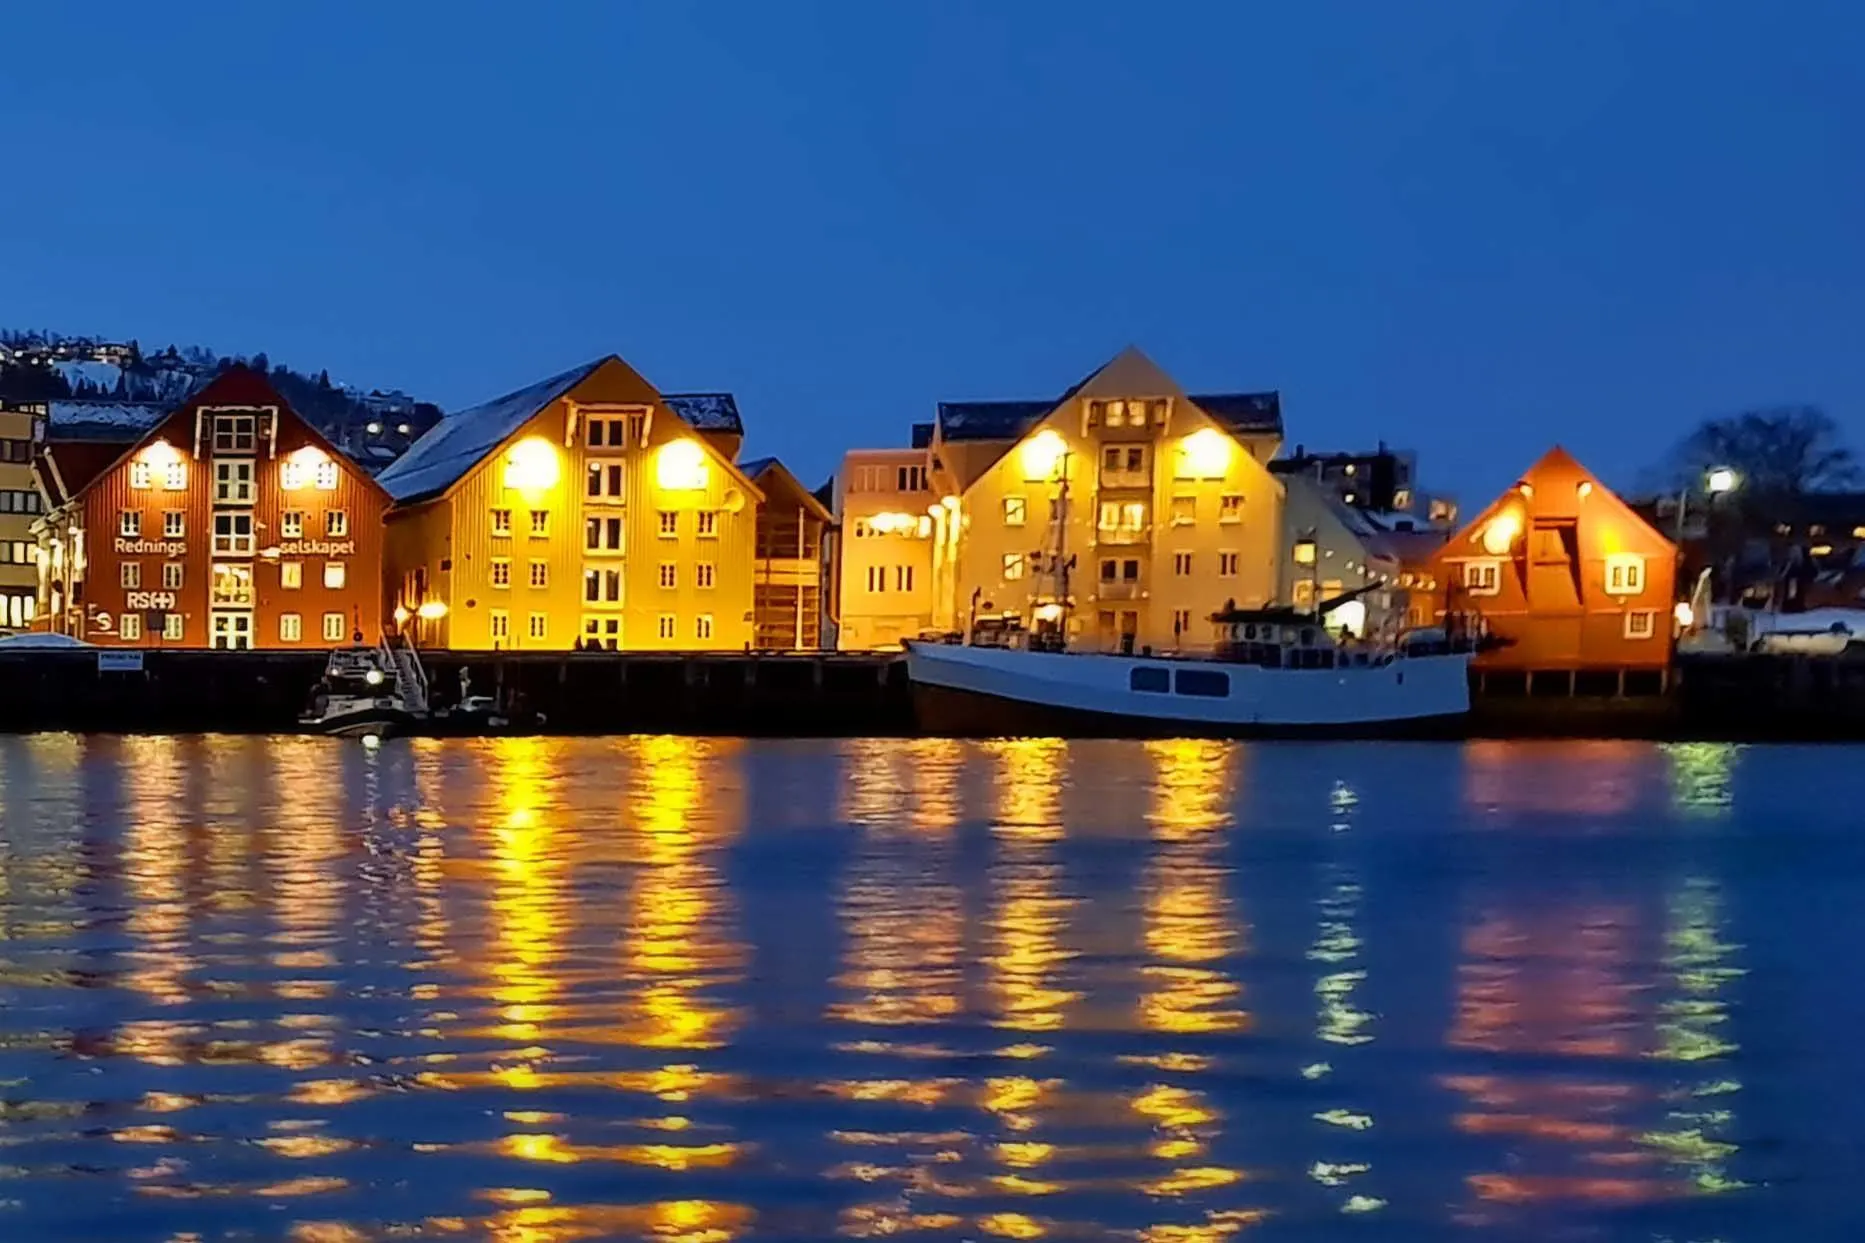 Tromso Hotels - where to stay in Tromso and best hotels for all budgets